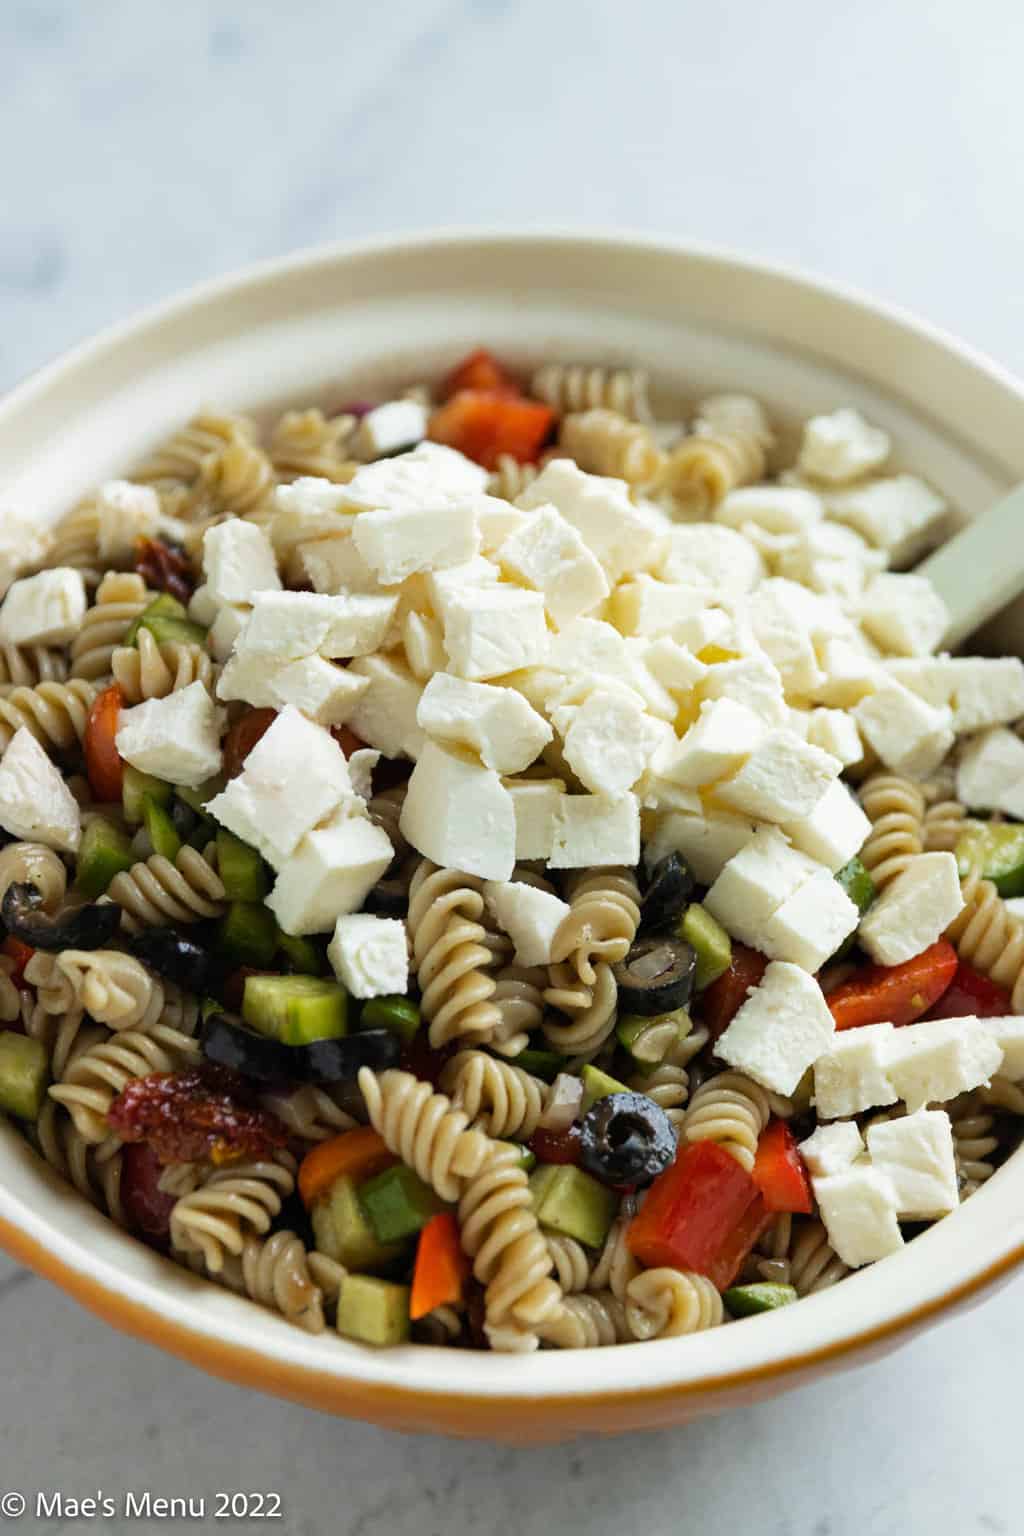 A side shot of a mixing bowl of pasta salad with cubed mozzarella cheese.